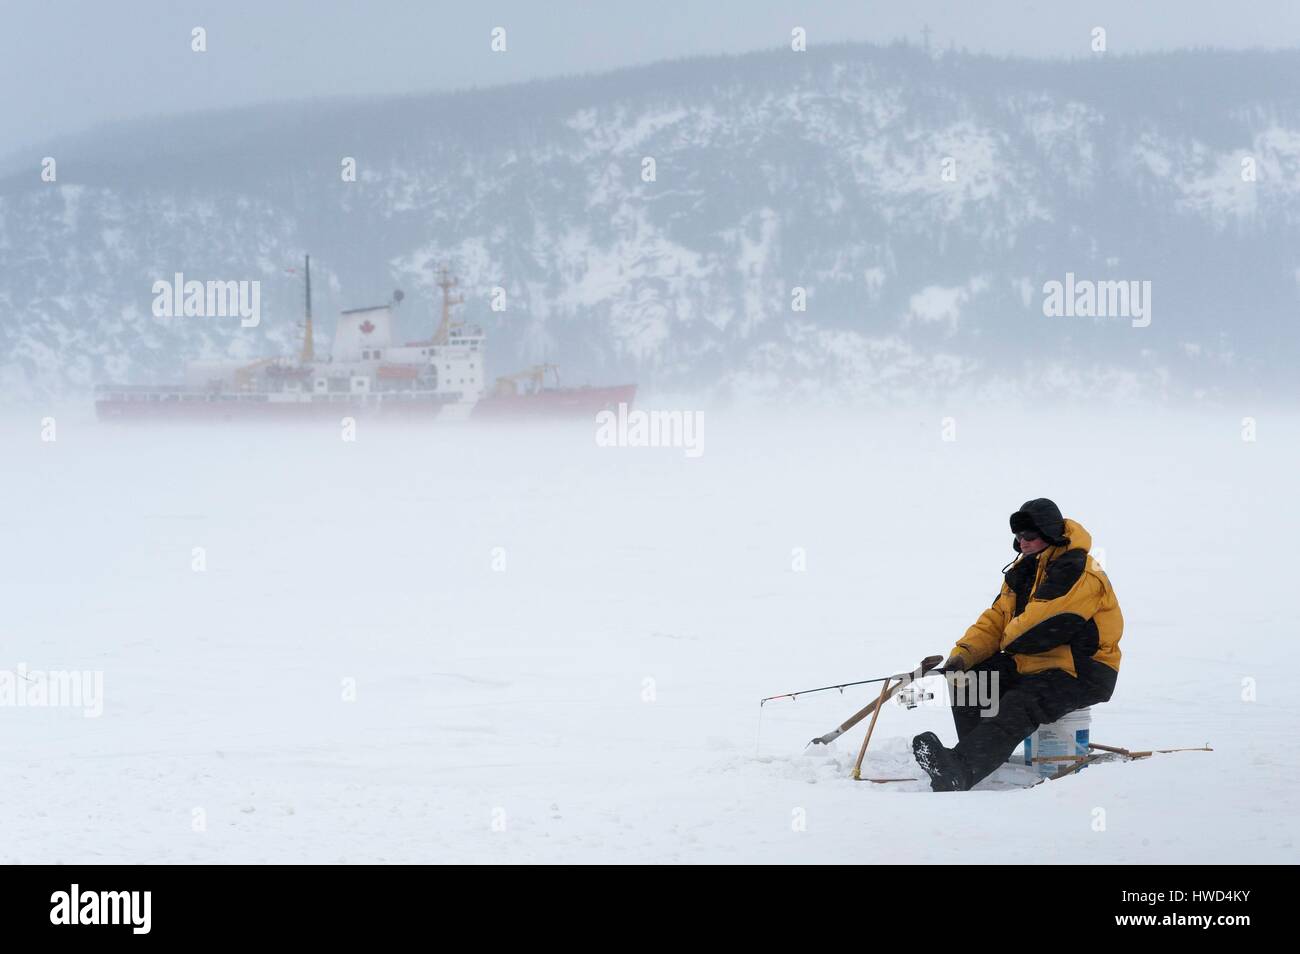 Canada, Quebec, Saguenay, La Baie, white fishing village of Anse a Benjamin, one man fishing on the ice, icebreaker in the background Stock Photo